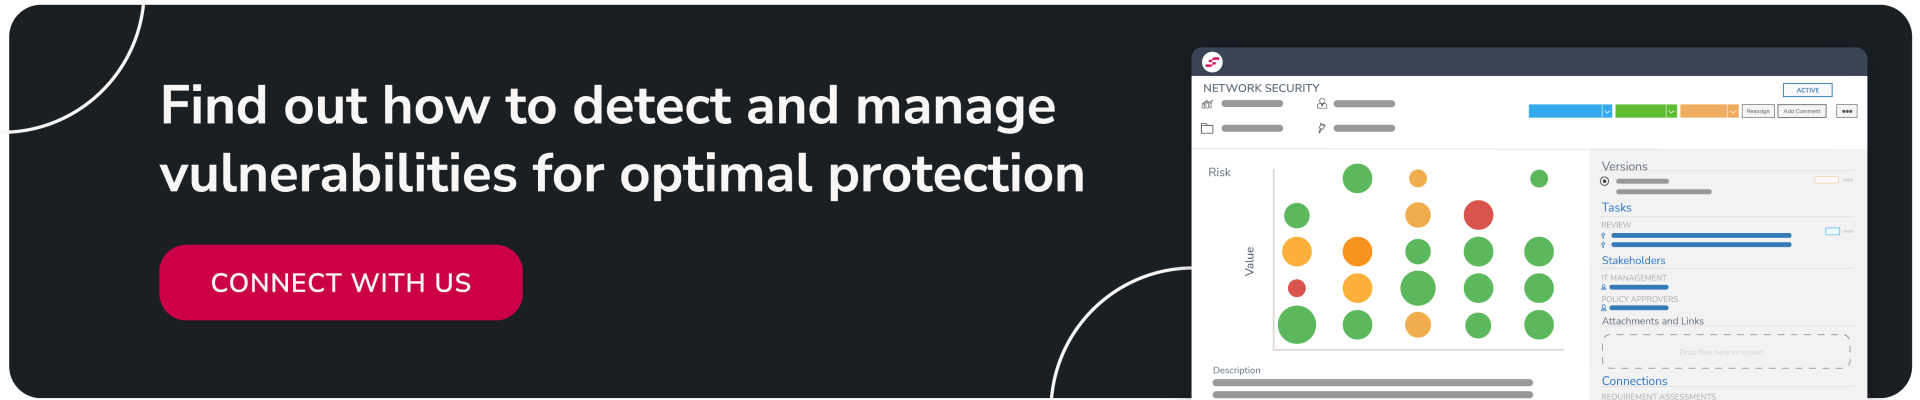 Find out how to detect and manage vulnerabilities for optimal protection